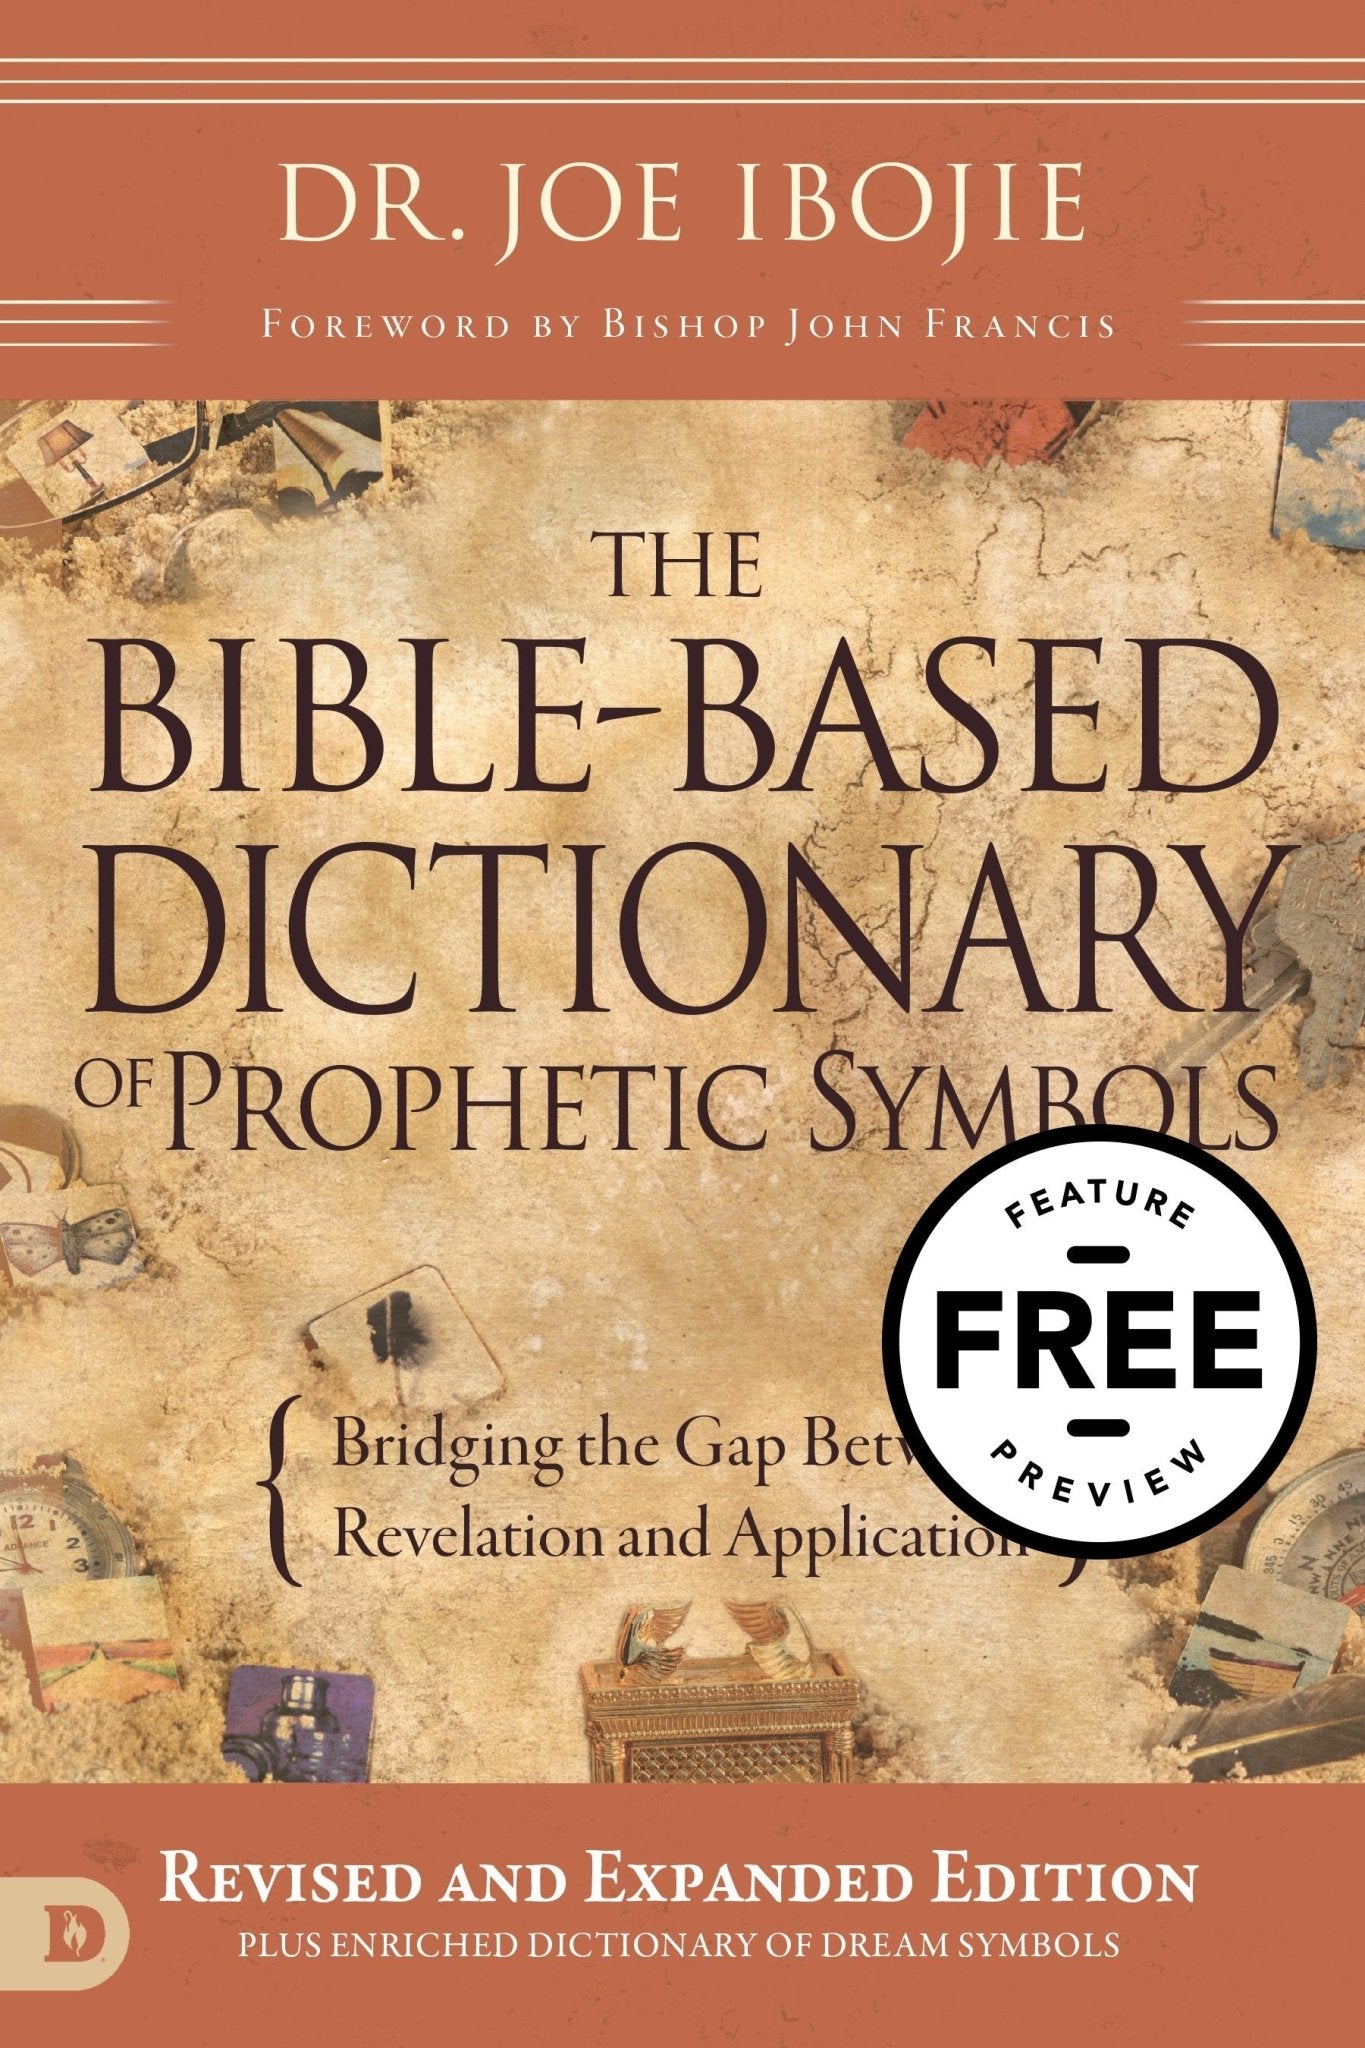 The Bible-Based Dictionary of Prophetic Symbols Free Feature Message (Digital Download) - Faith & Flame - Books and Gifts - Destiny Image - DIFIDD